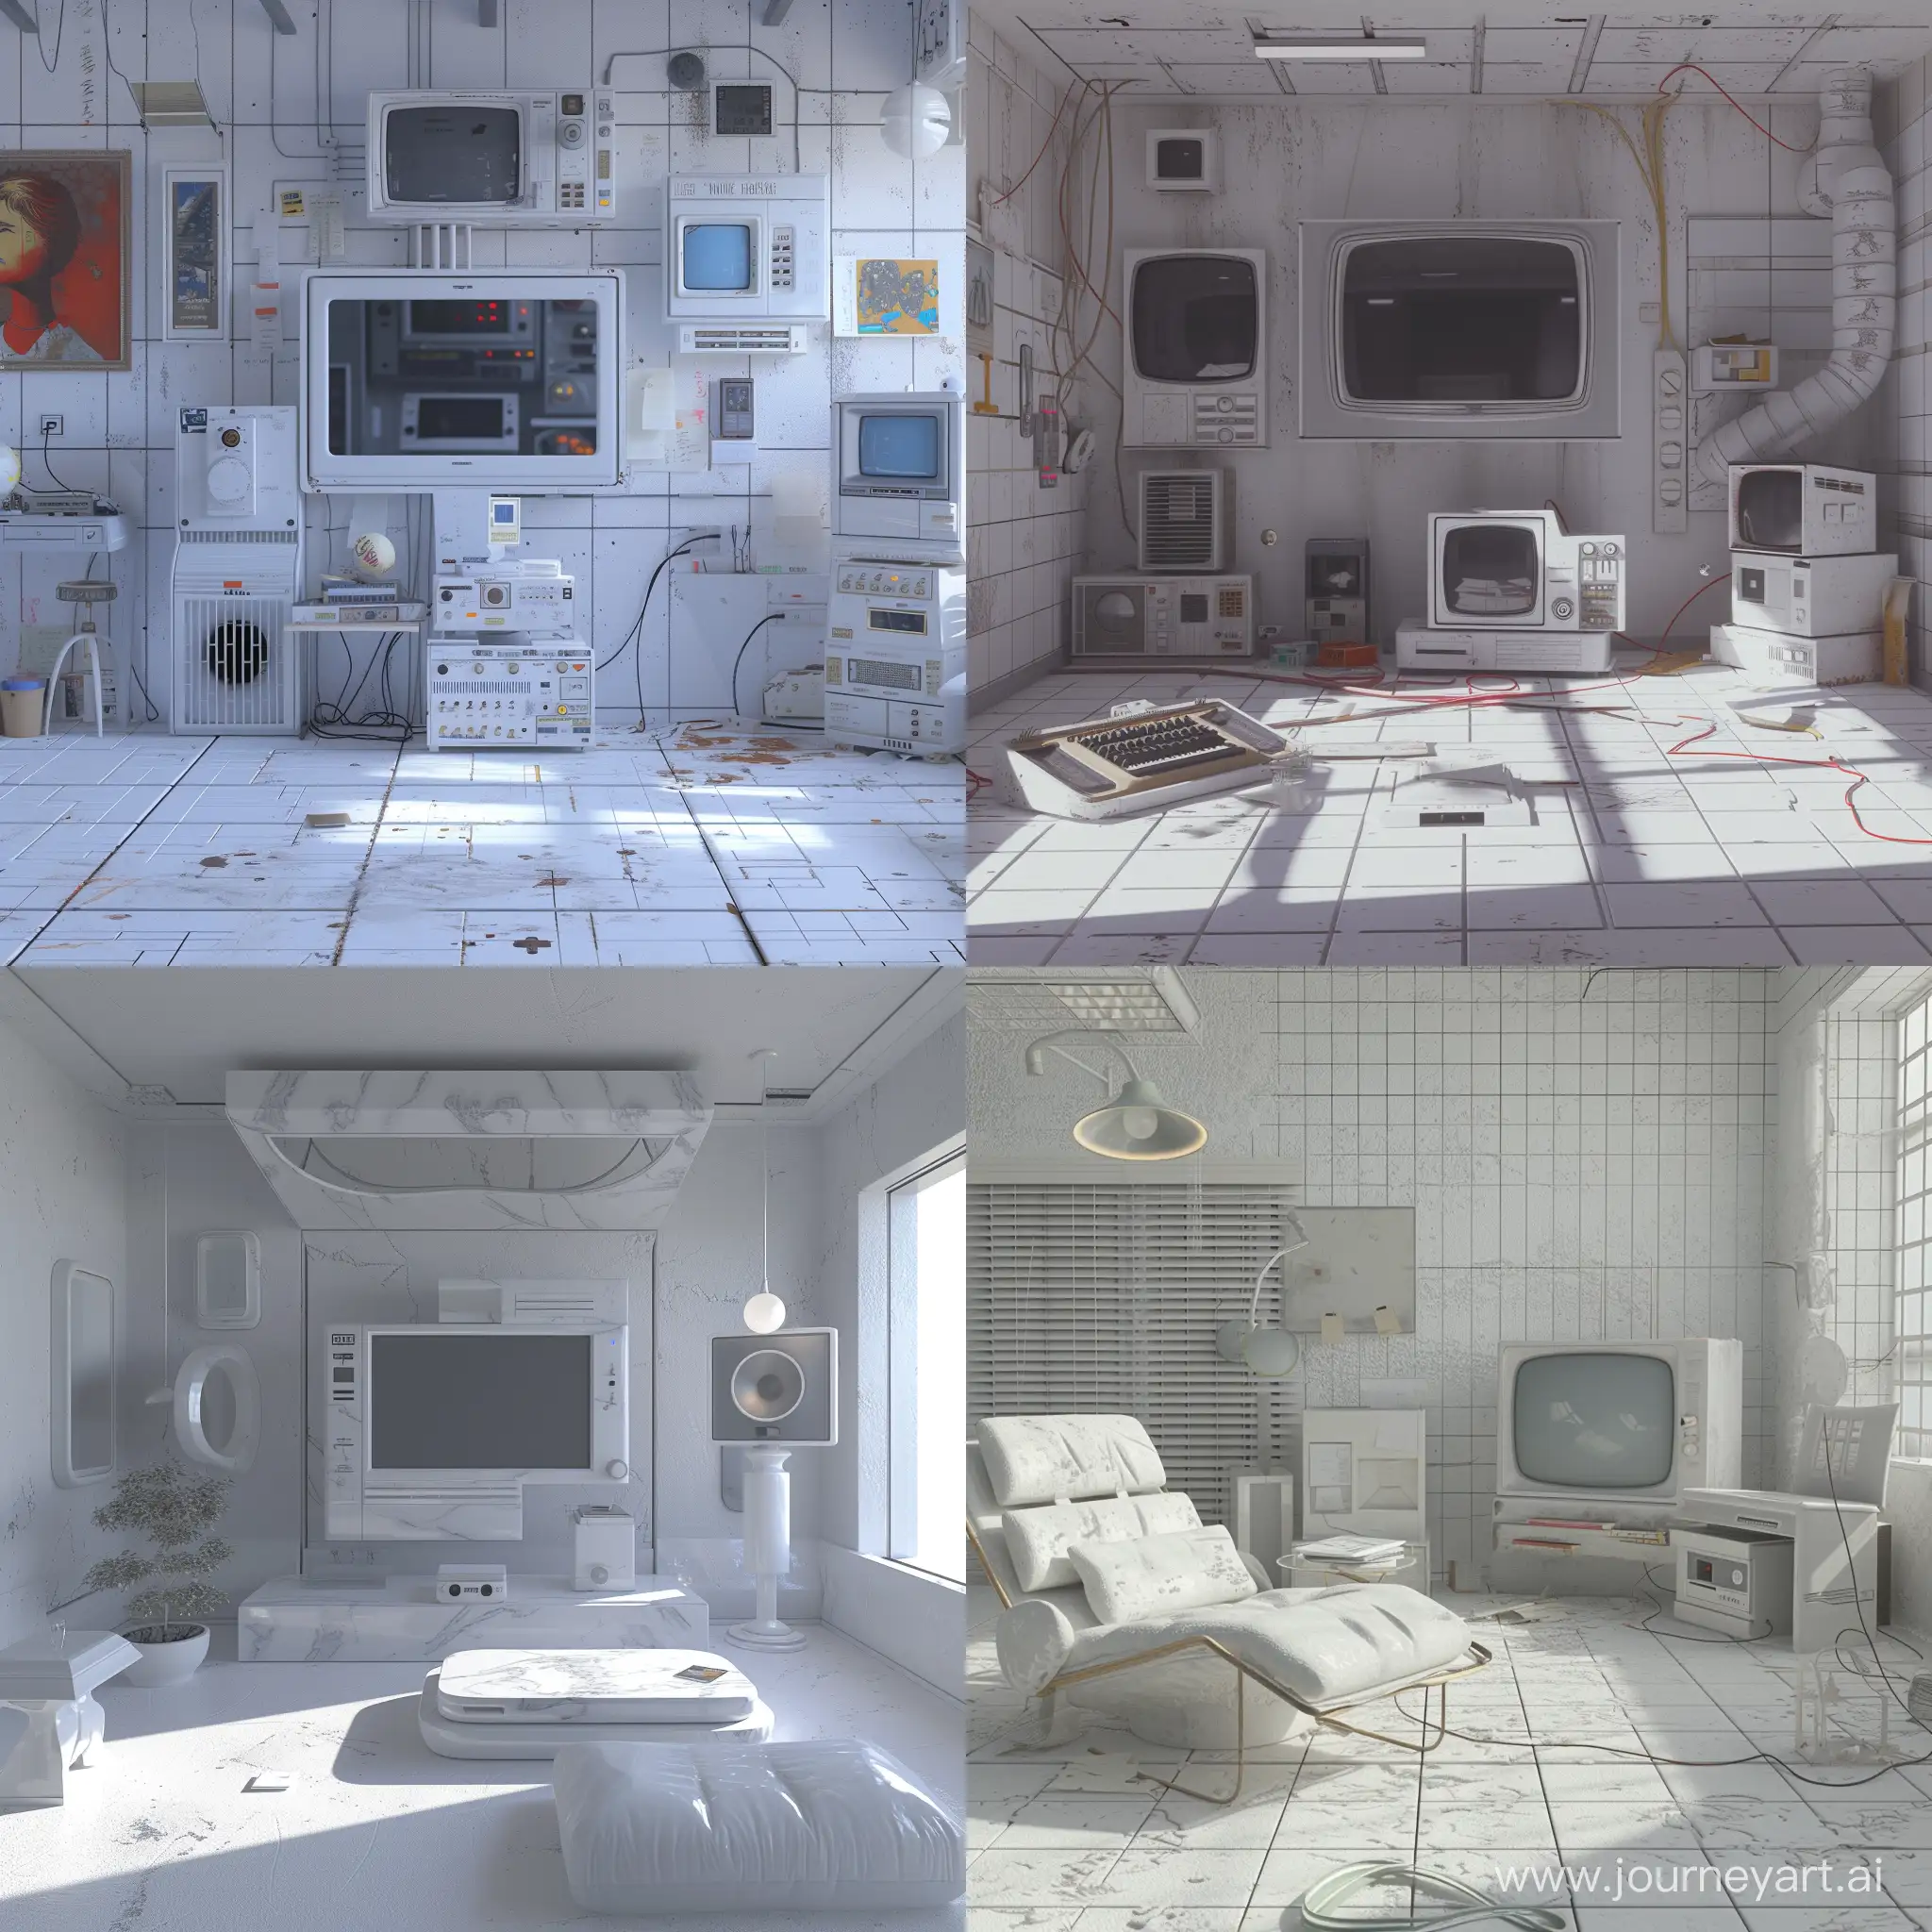 A room from the 80s, real, realistic, photorealistic, vintage, indie, classic, retro, antique, 80s aesthetic, 80s style, 80s effect, 80s look, mega detailed, white and gray aesthetic